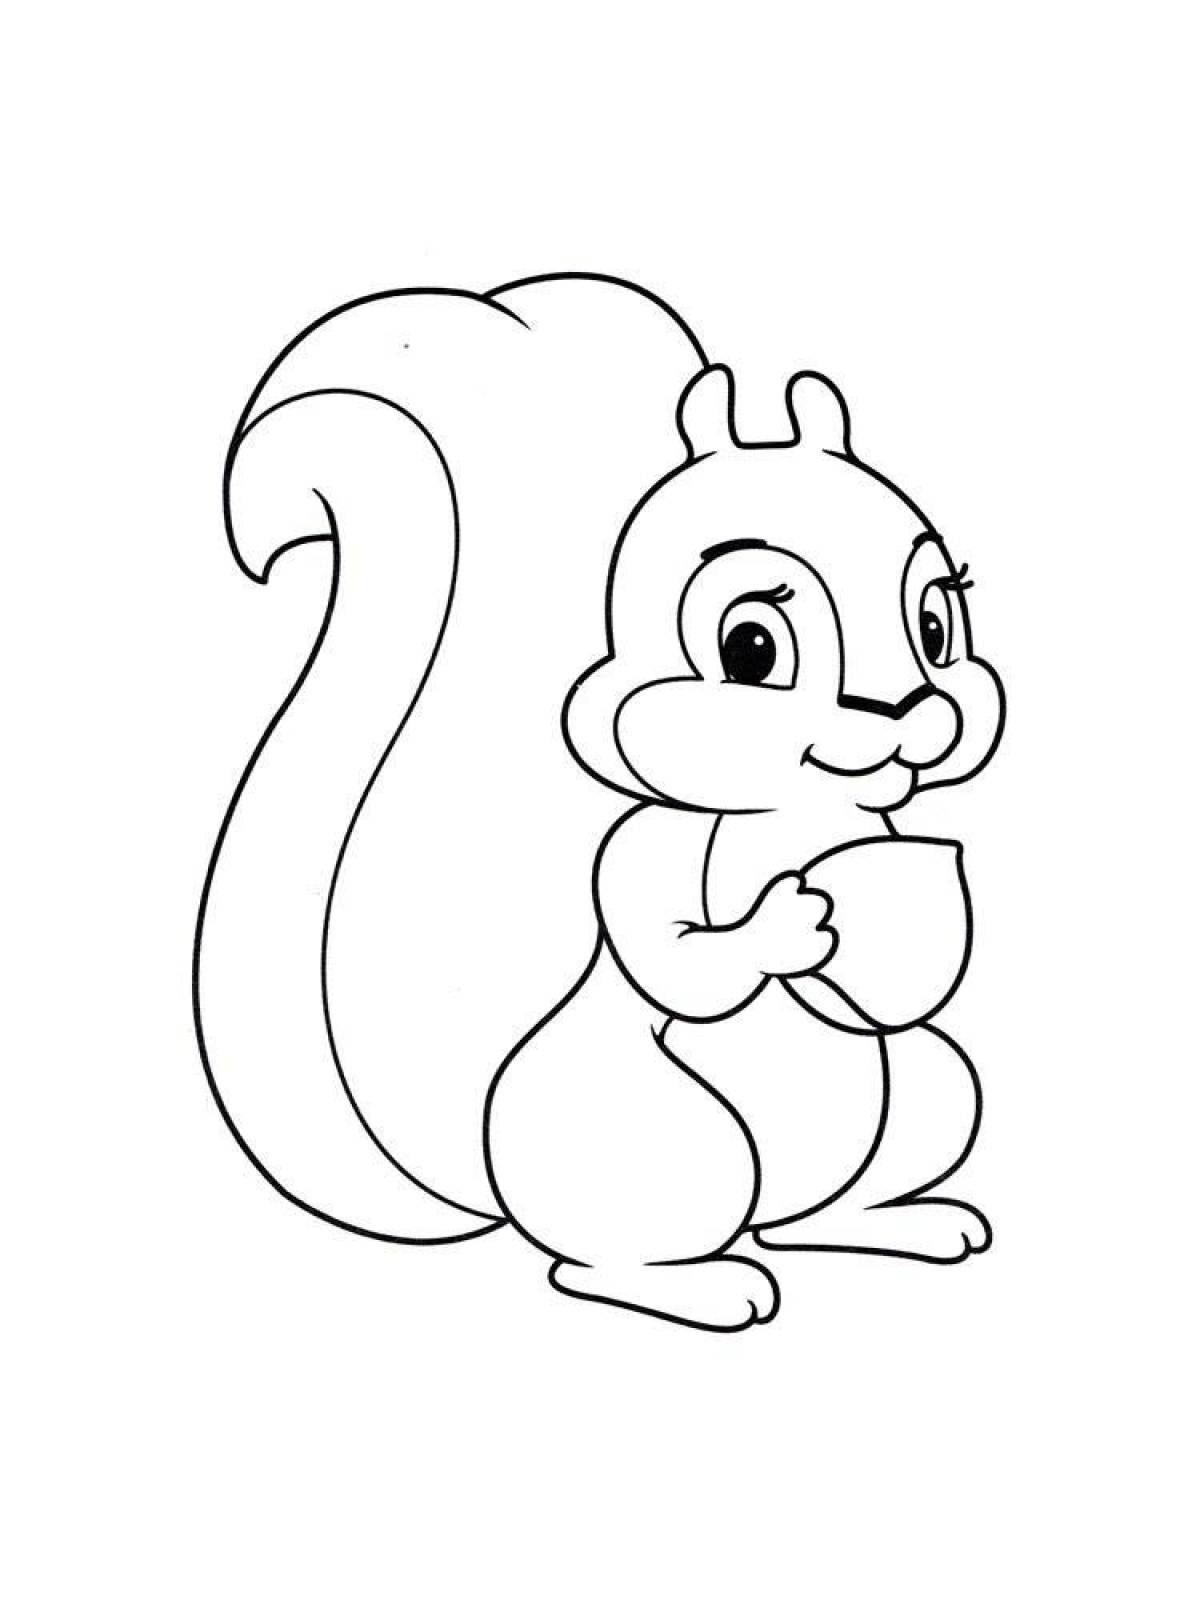 Humorous squirrel coloring book for kids